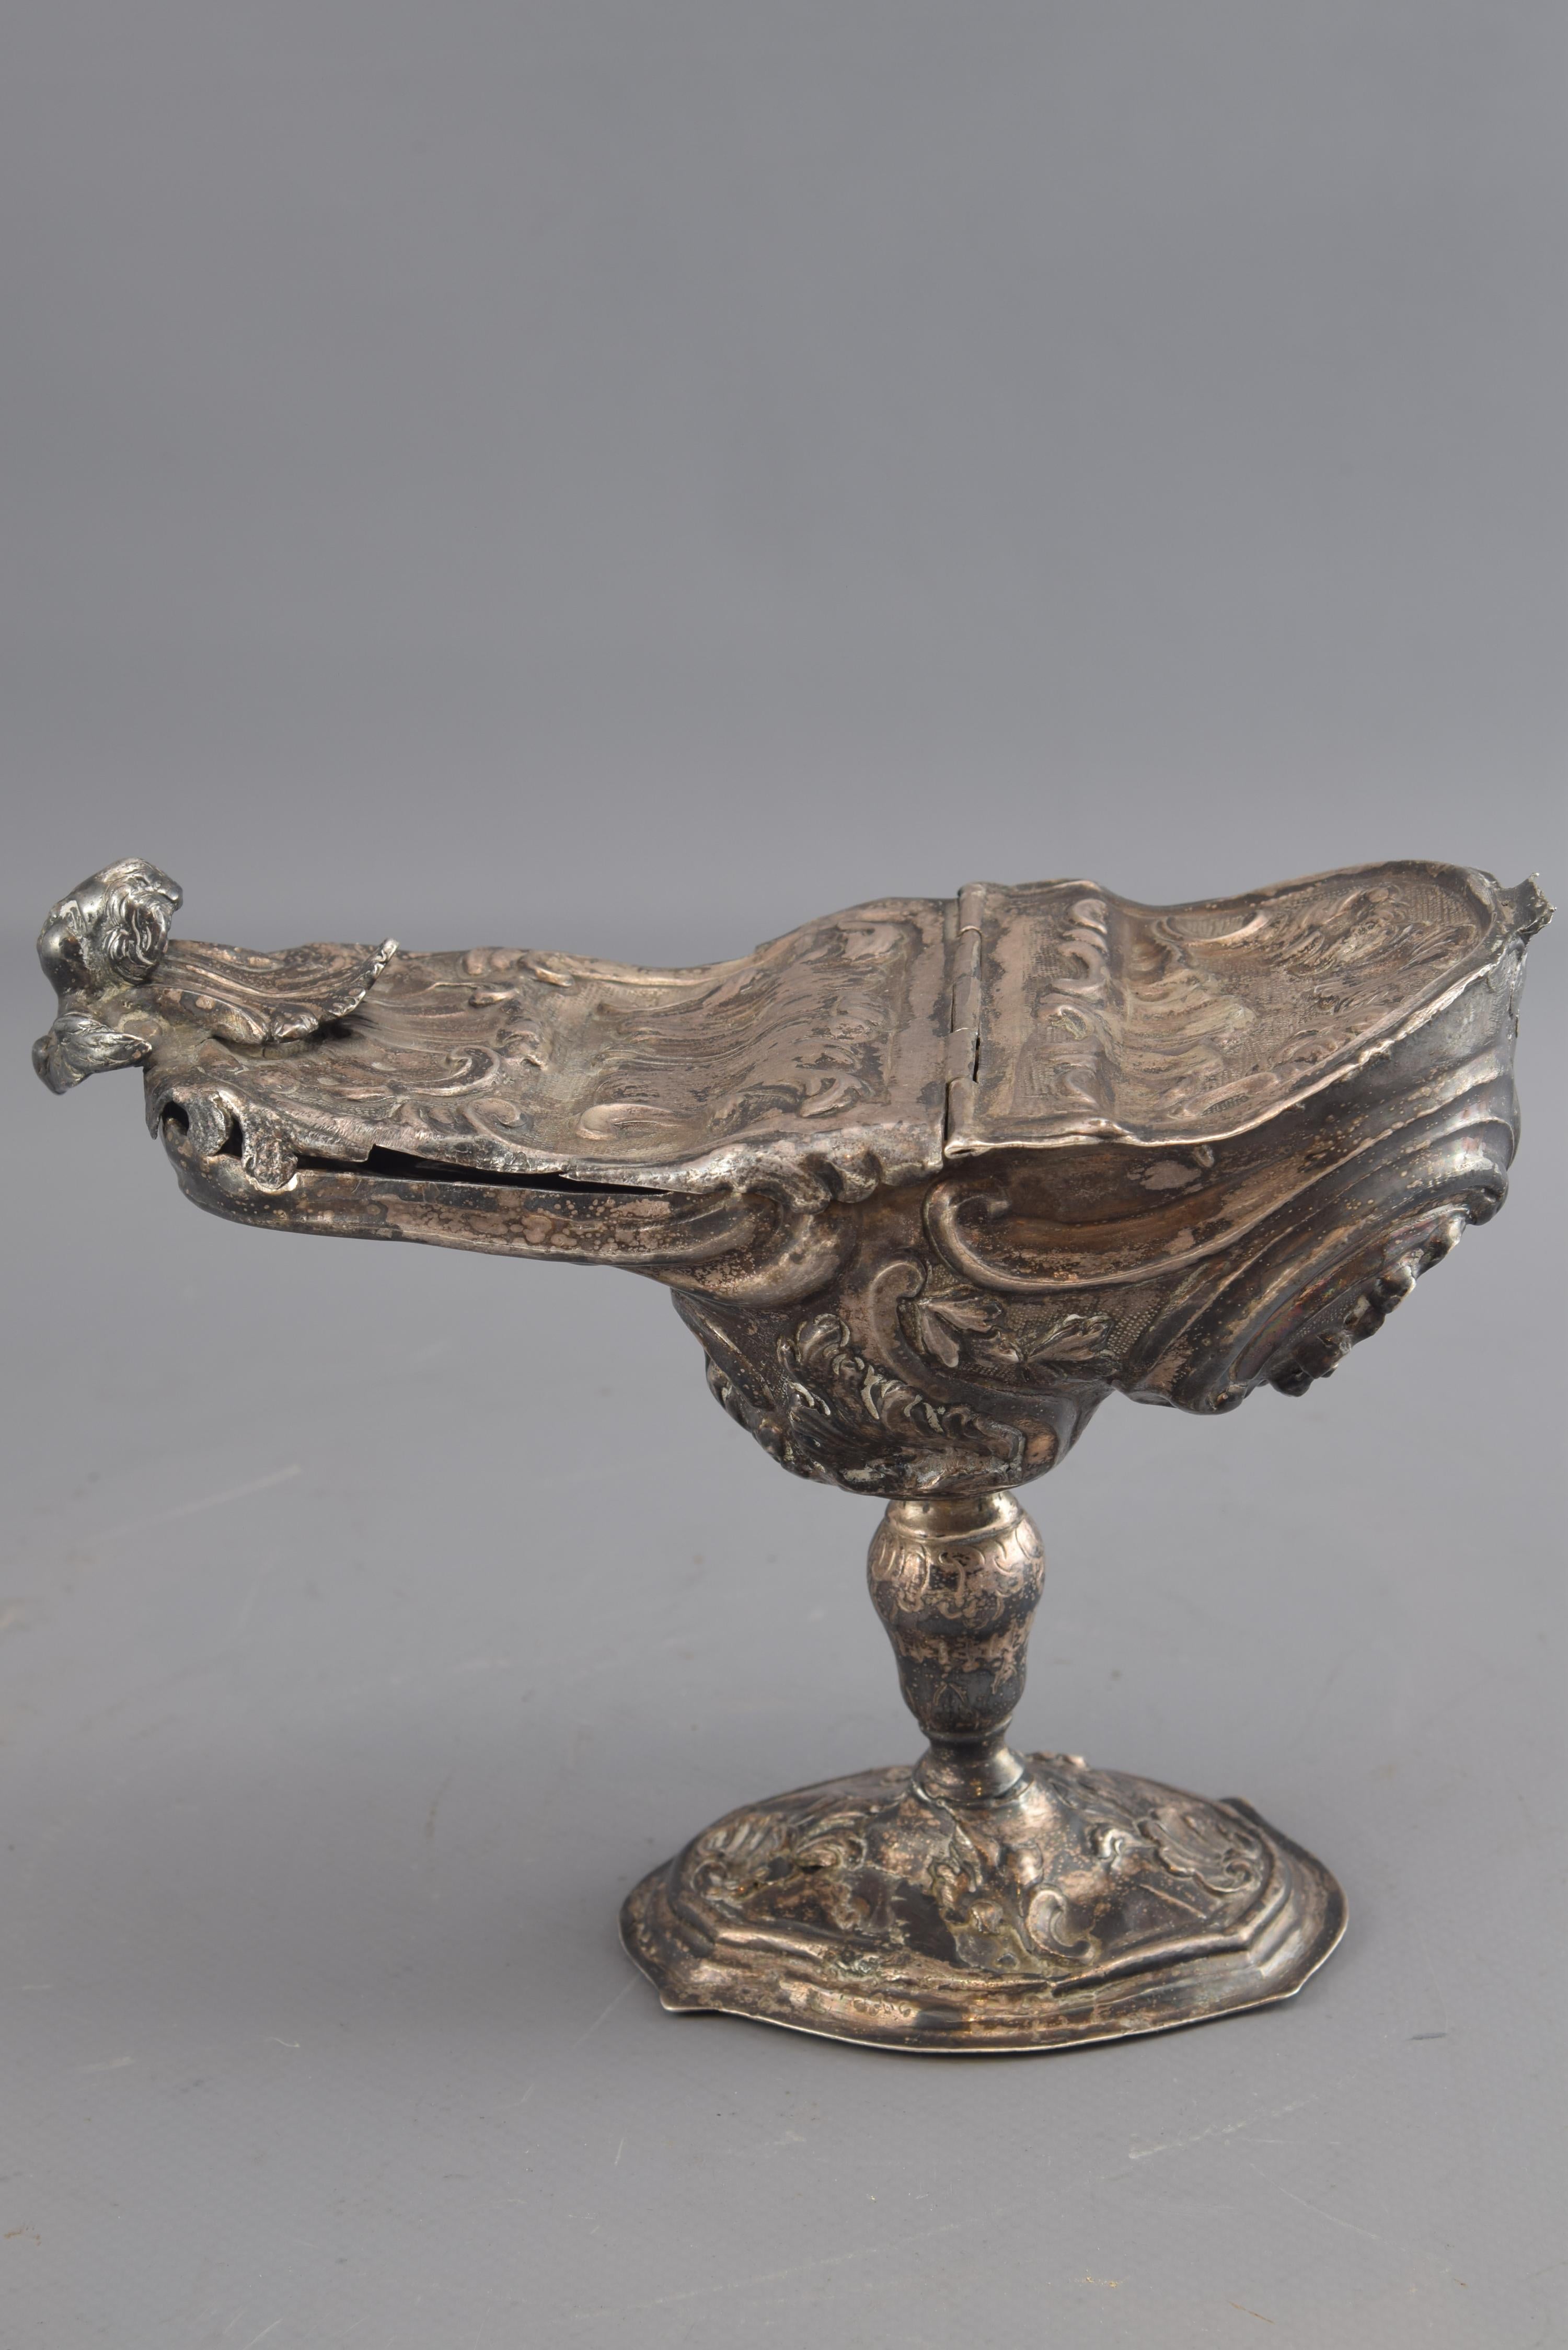 Naveta. Silver. Possibly Portugal, 18th century.
Base with counterweight. With hallmarks.
Naveta with oval foot decorated with relief elements and moldings, balustrade foot and body with light boat shape, presenting a hinged lid in the front, a